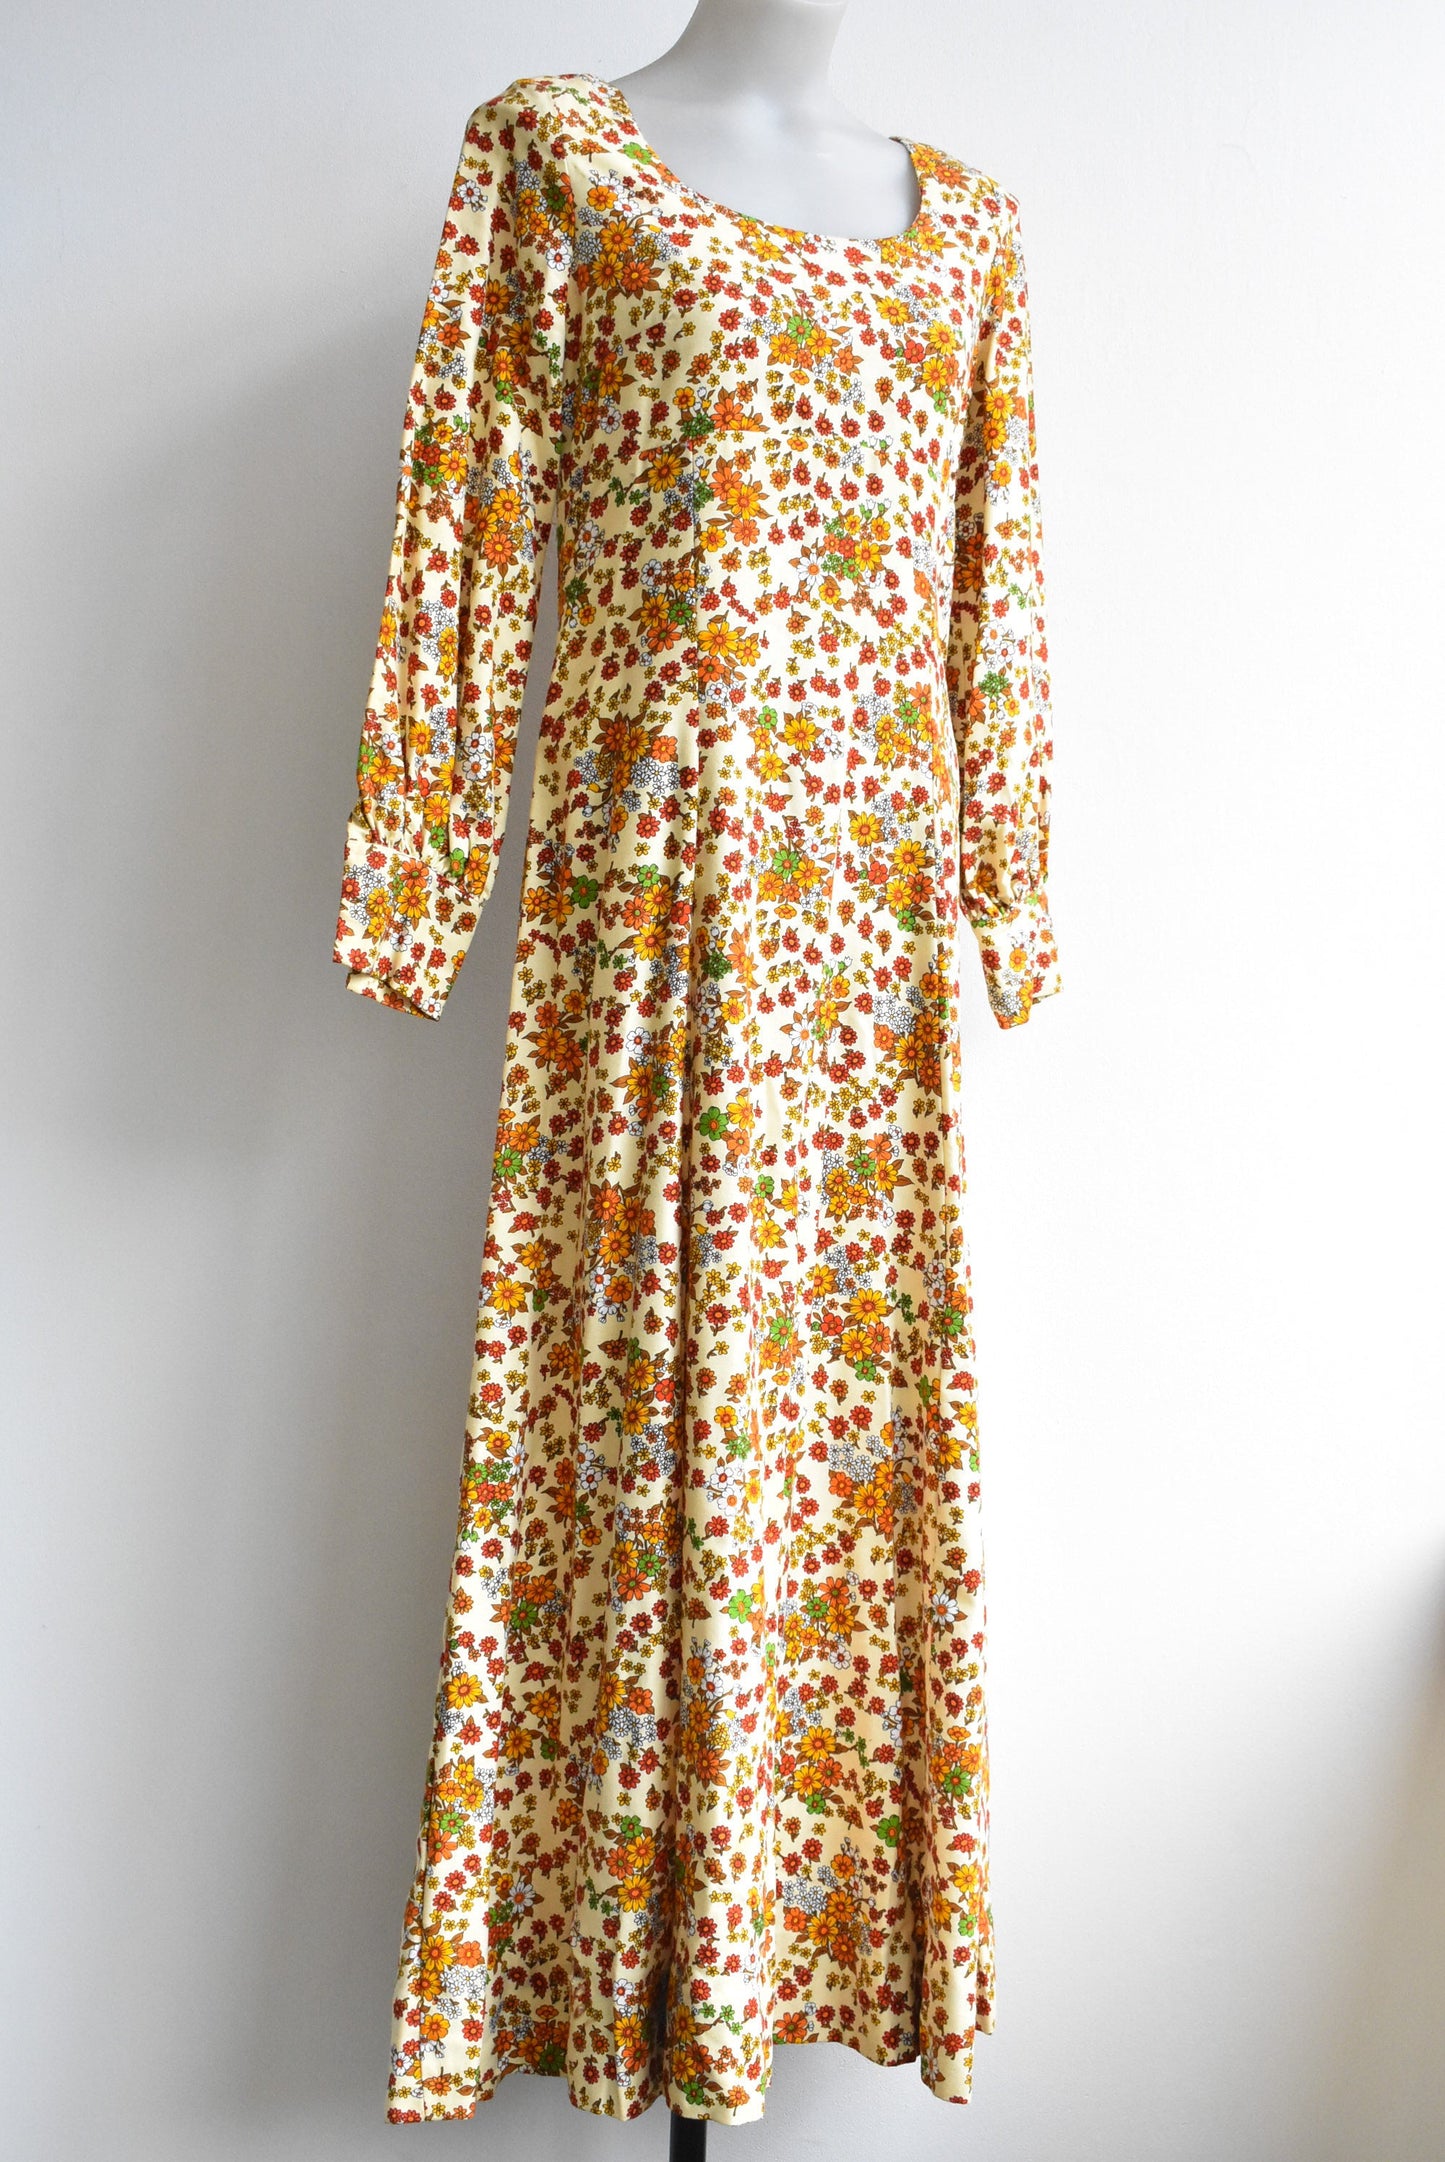 Handmade long floral dress/possible bed gown